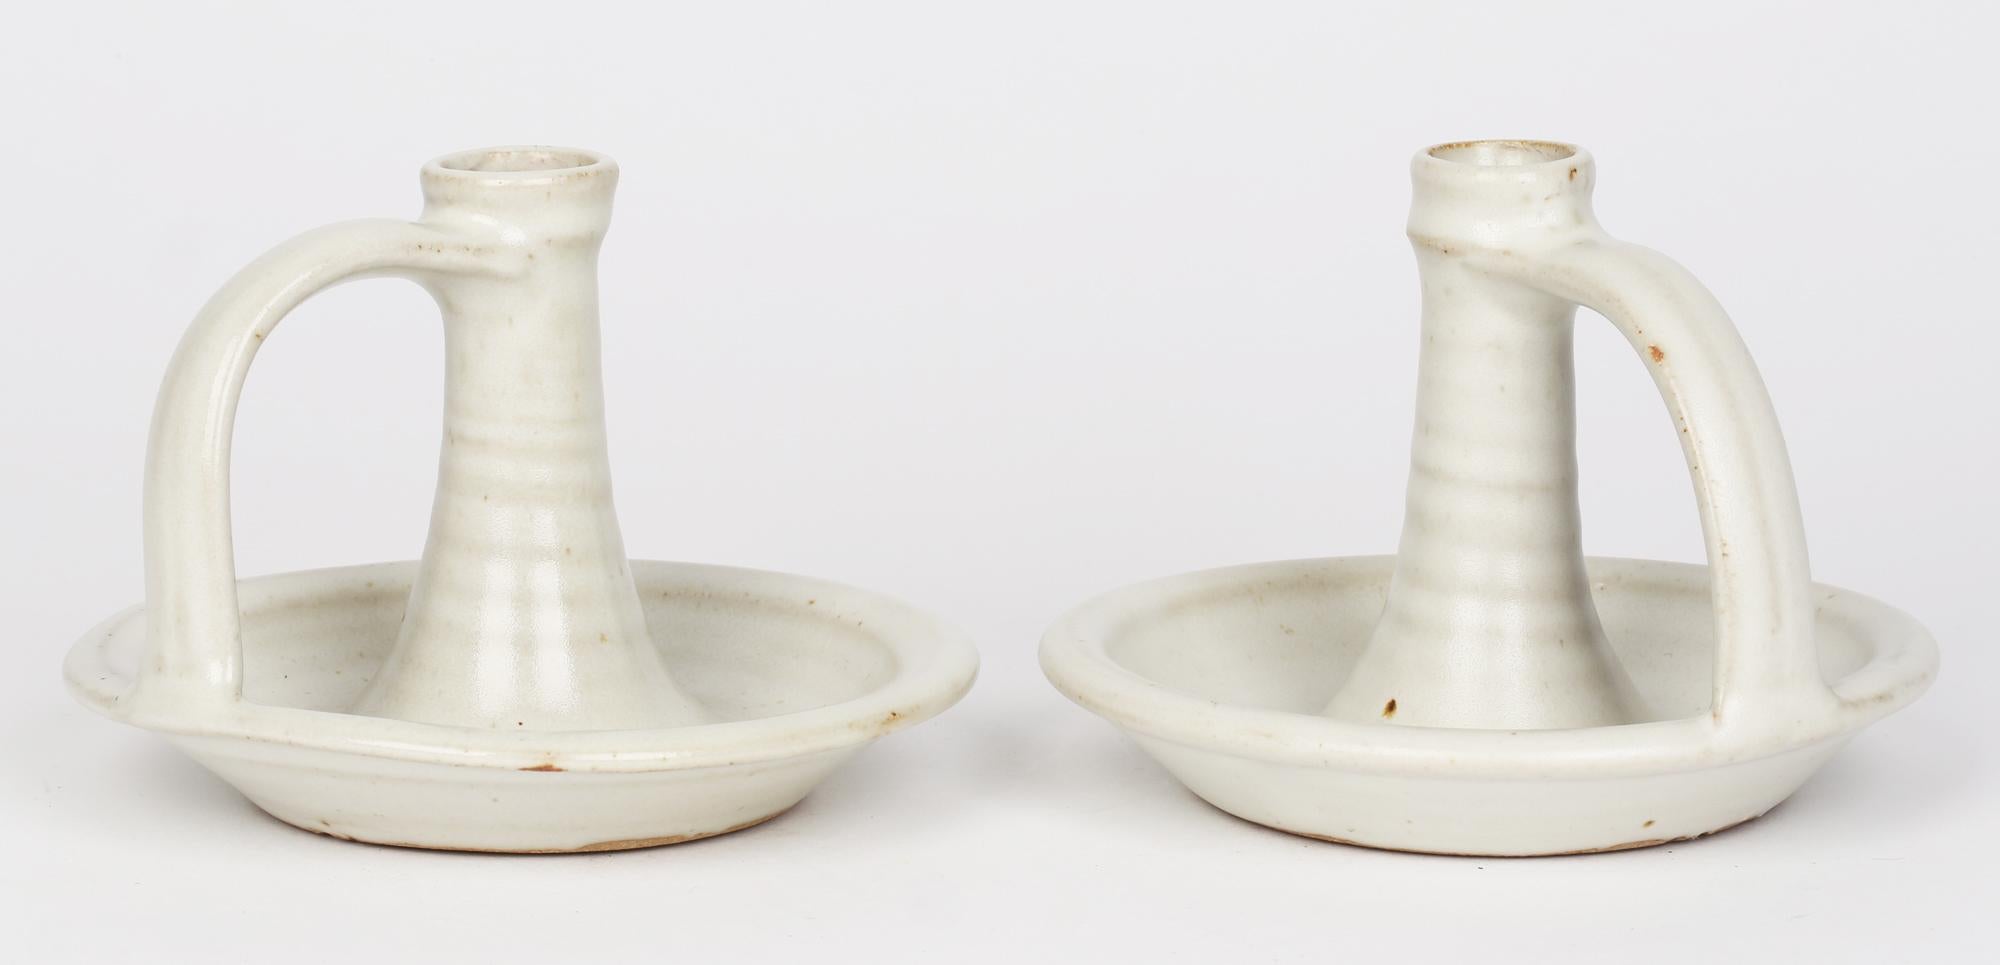 A pair Winchcombe Pottery wood fired studio pottery chamber sticks decorated in oatmeal glazes dating from the 20th century. The chambersticks have a wide bowl shaped base with a raised rim and with a raised hollow candle holder to the center with a